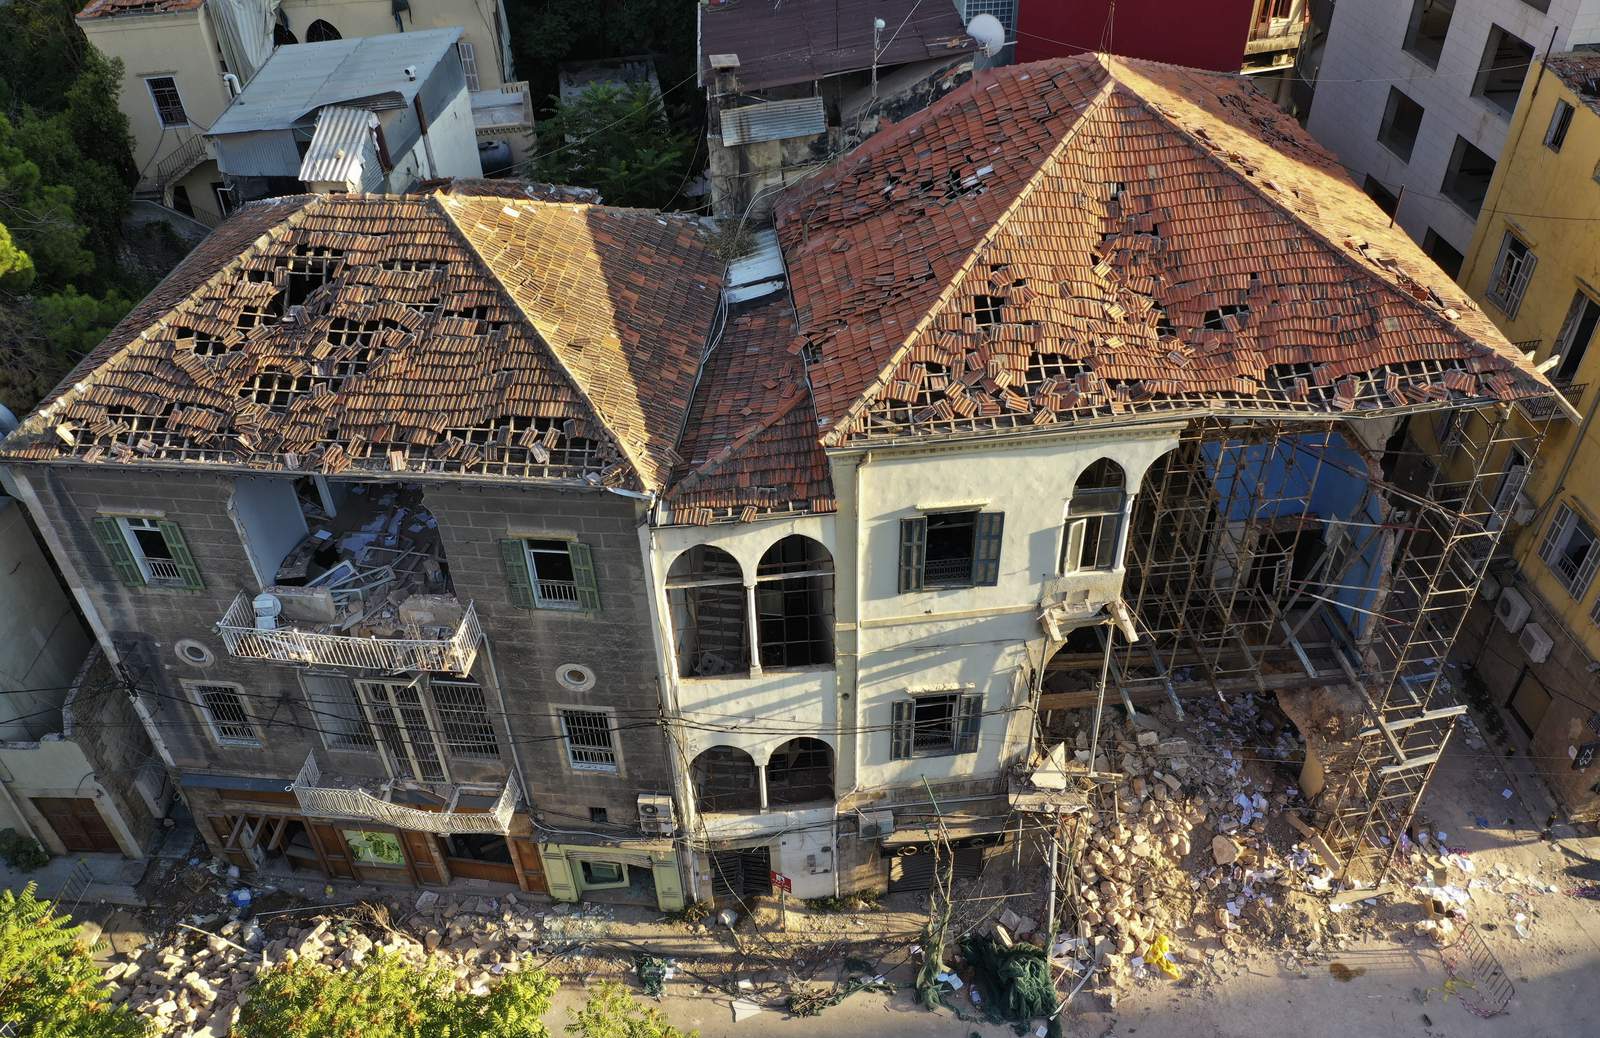 Beirut residents determined to save heritage lost to blast